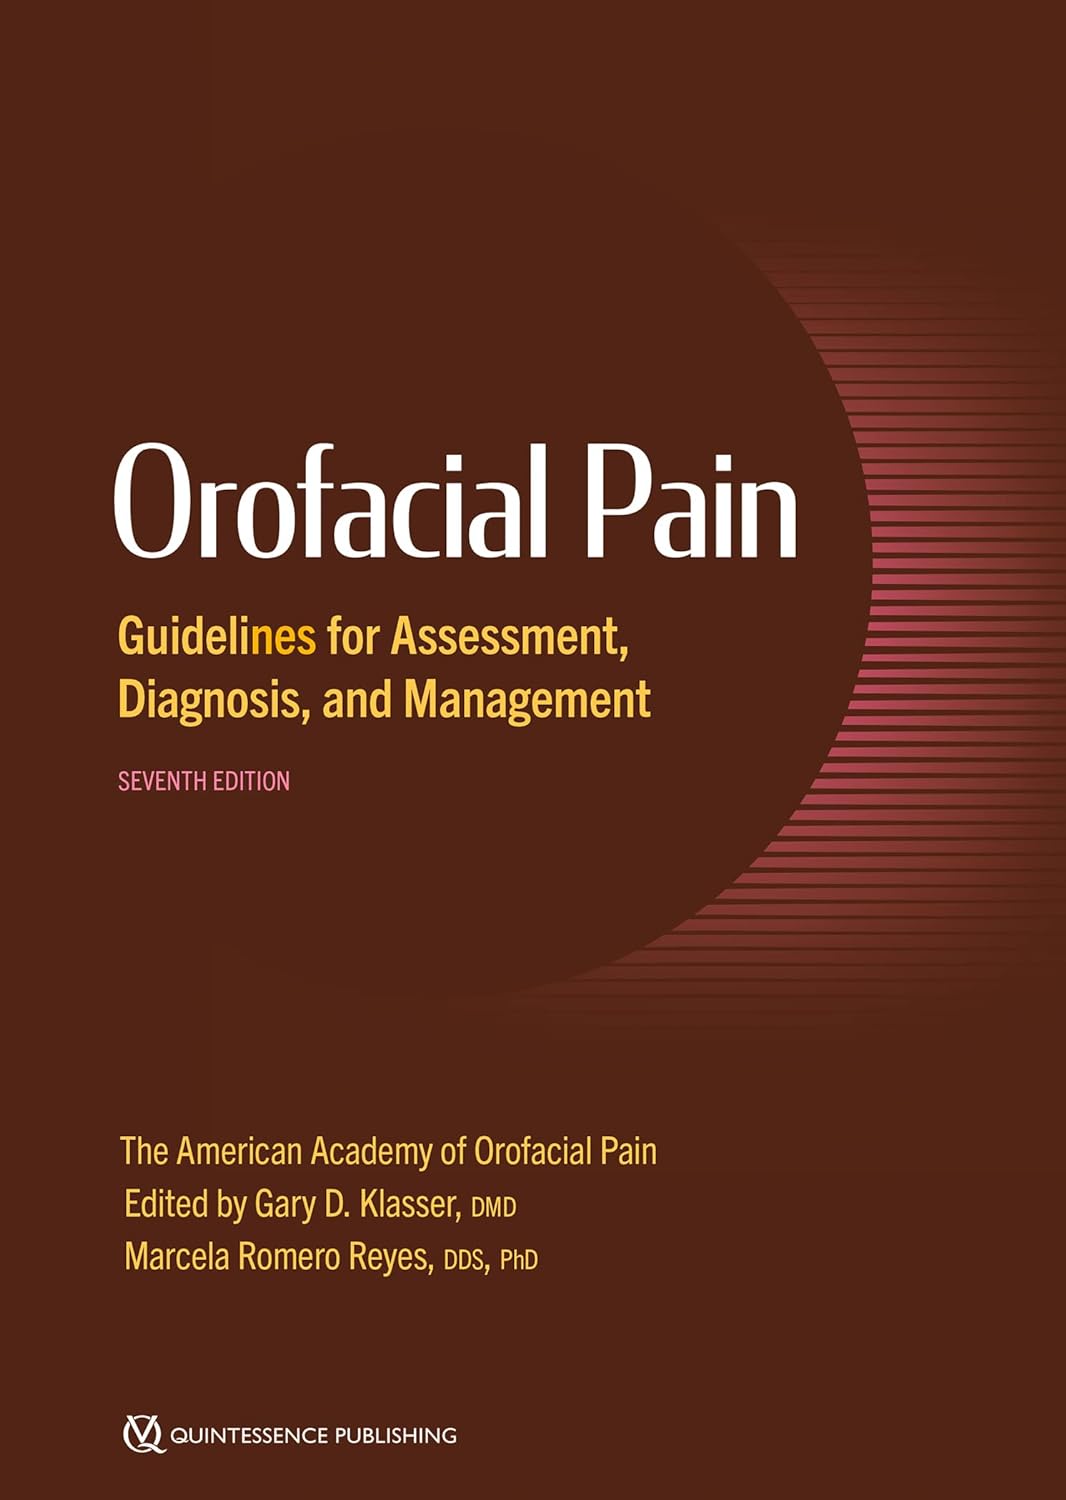 Orofacial Pain Guidelines for Assessment, Diagnosis, and Management (AAOP The American Academy of Orofacial Pain), 7th Edition